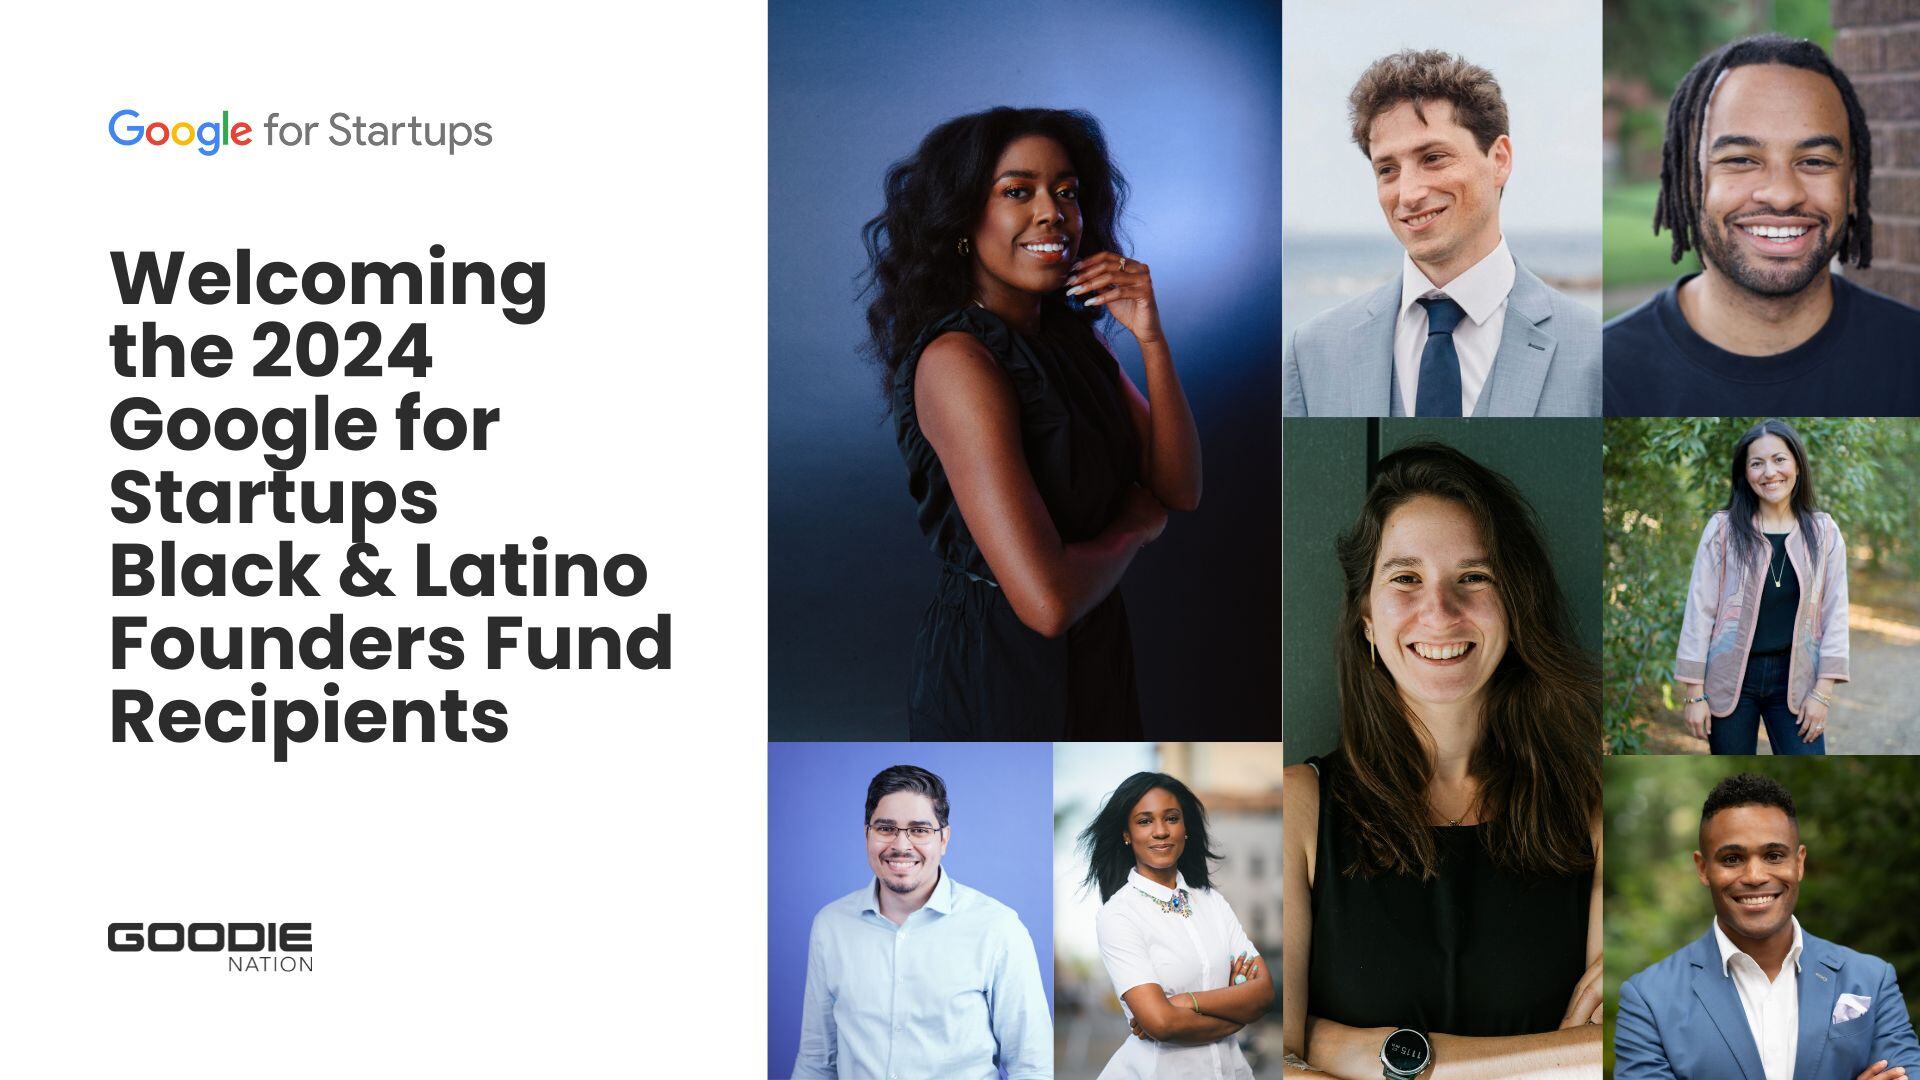 Spread the word! Share this post and use the hashtag #FundBlackFounders #FundLatinoFounders to get the conversation going.